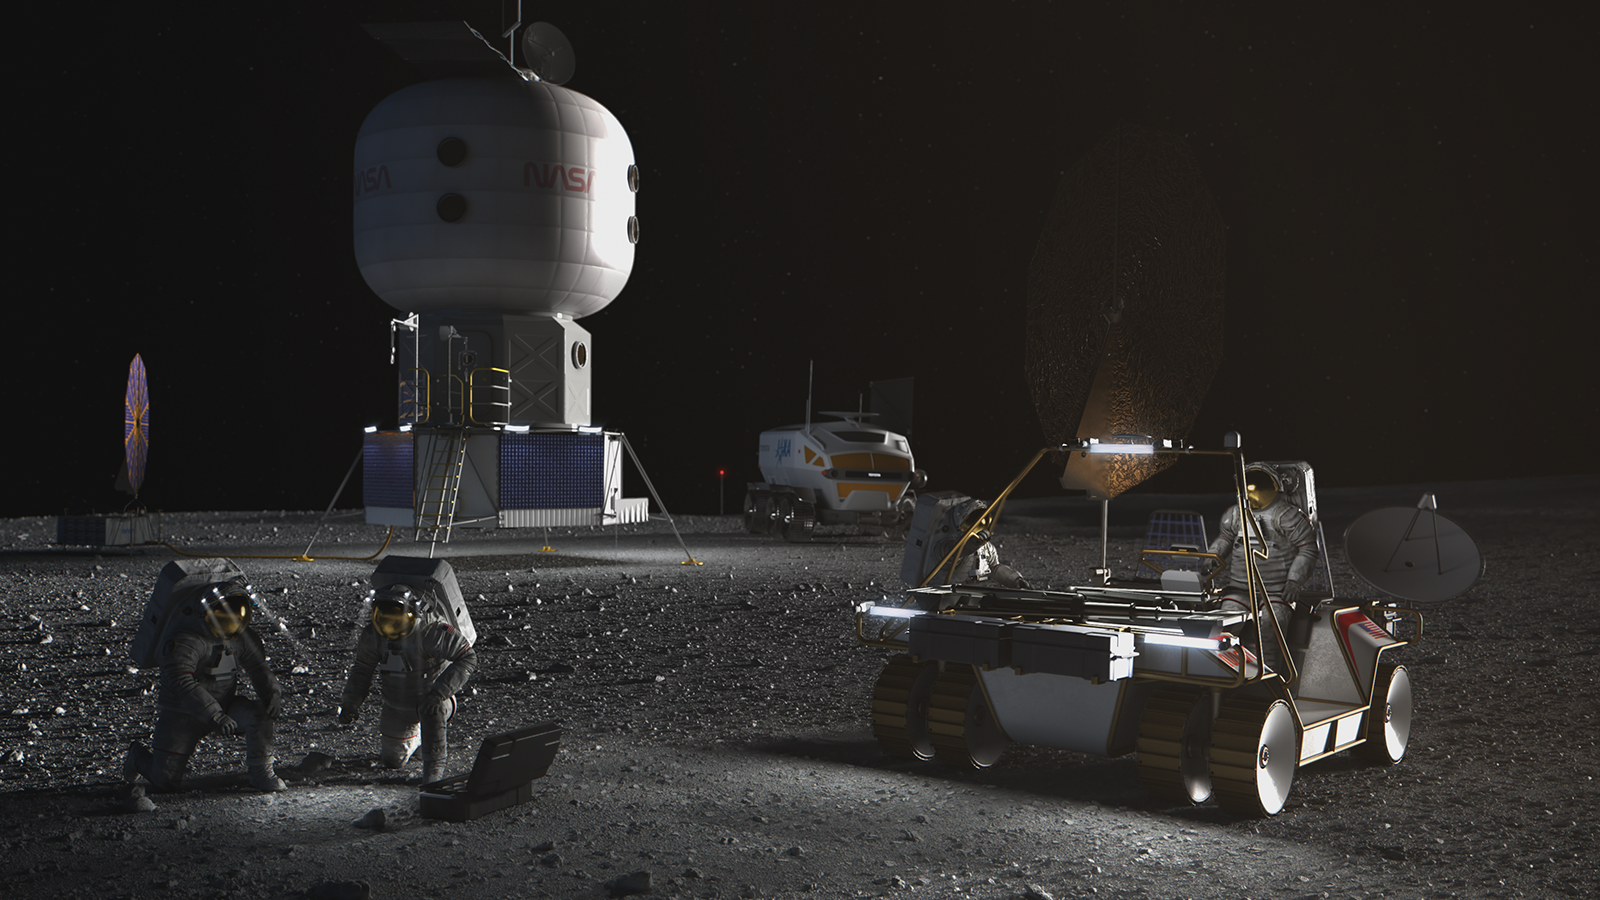 Scene of NASA Artemis astronauts on the Moon conducting scientific research with a rover and power system behind them.